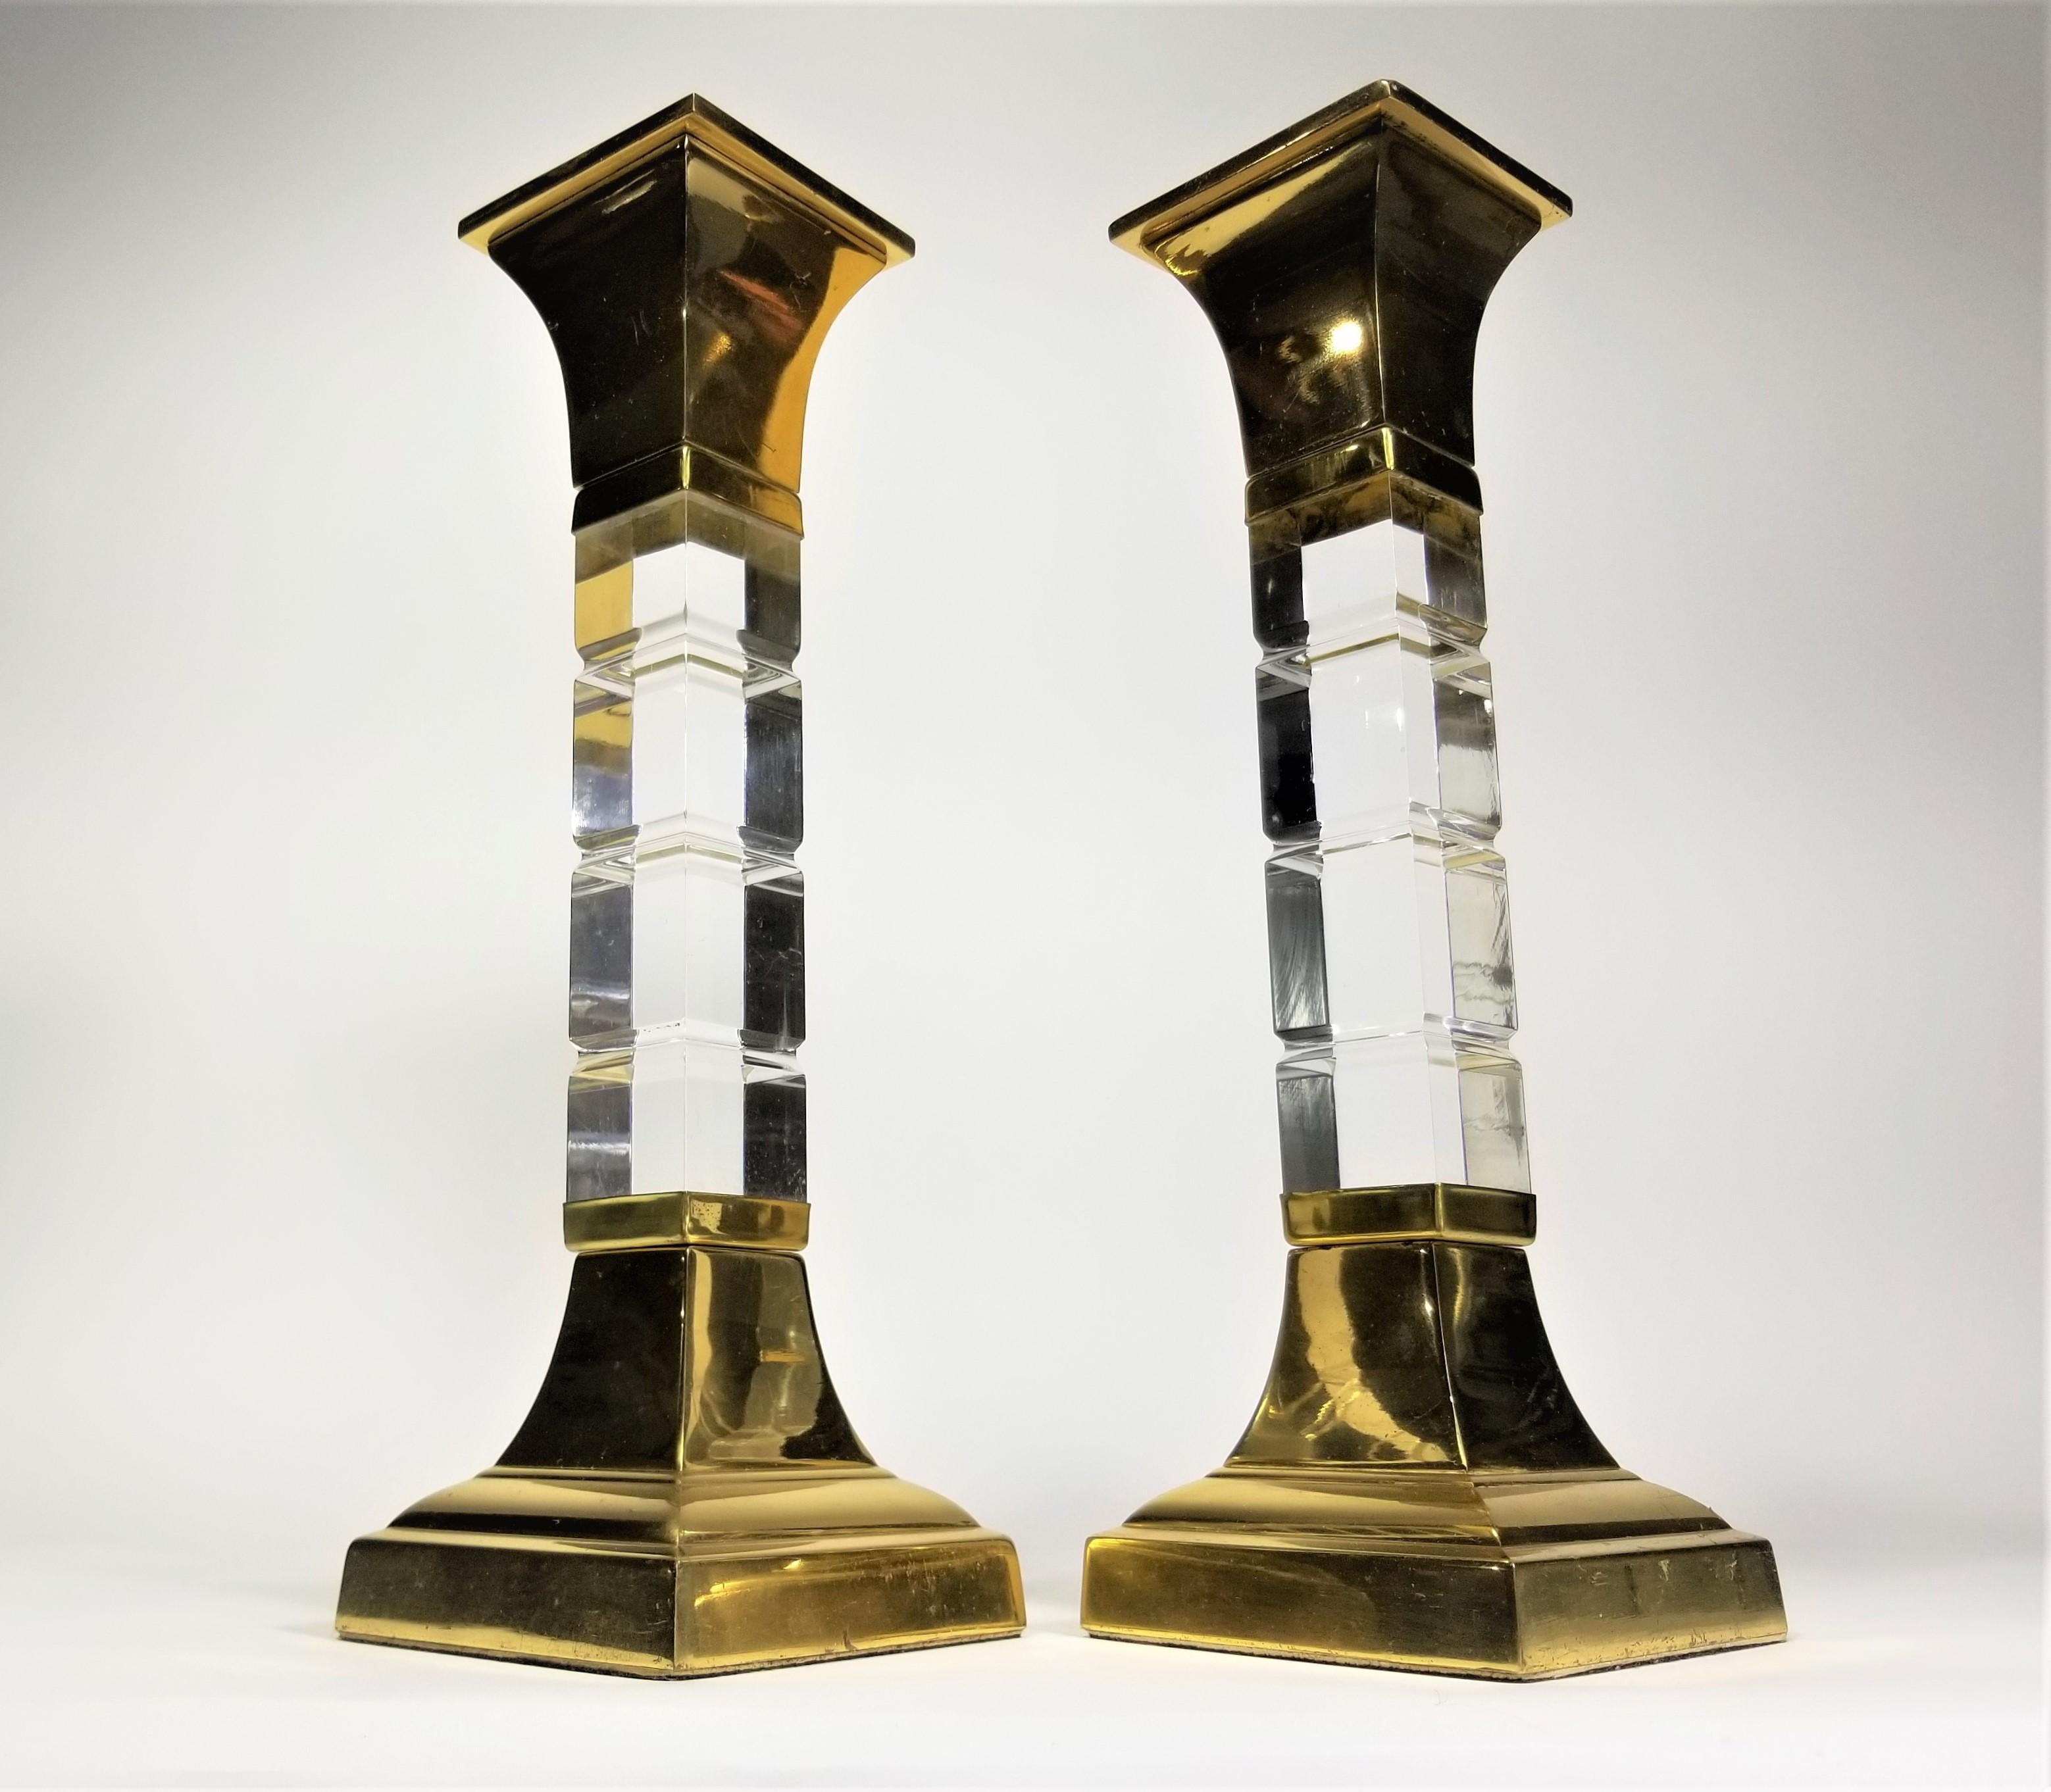 Pair of 1970s Mid Century Large Lucite and Lacquered brass candlesticks / Candle Holders. Heavy substantial weight.